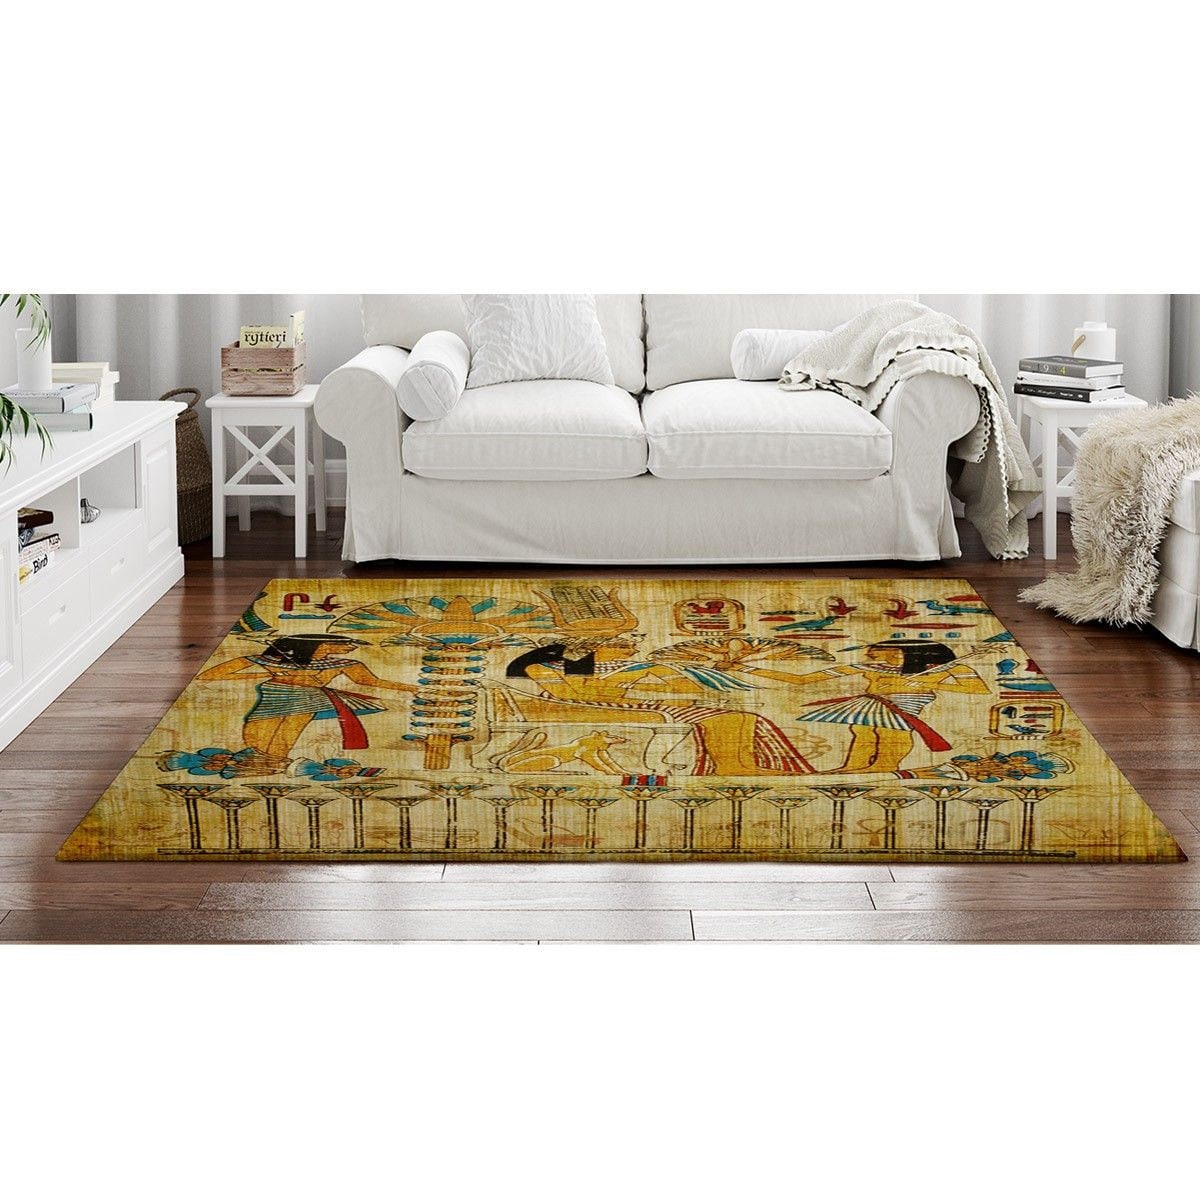 AGONA Modern Area Rug 4x6 Ancient Egyptian Rugs Soft Indoor Floor Carpet No-Shedding Non-Slip Rectangle Mat for Living Room Entryway Bedroom Dormitory